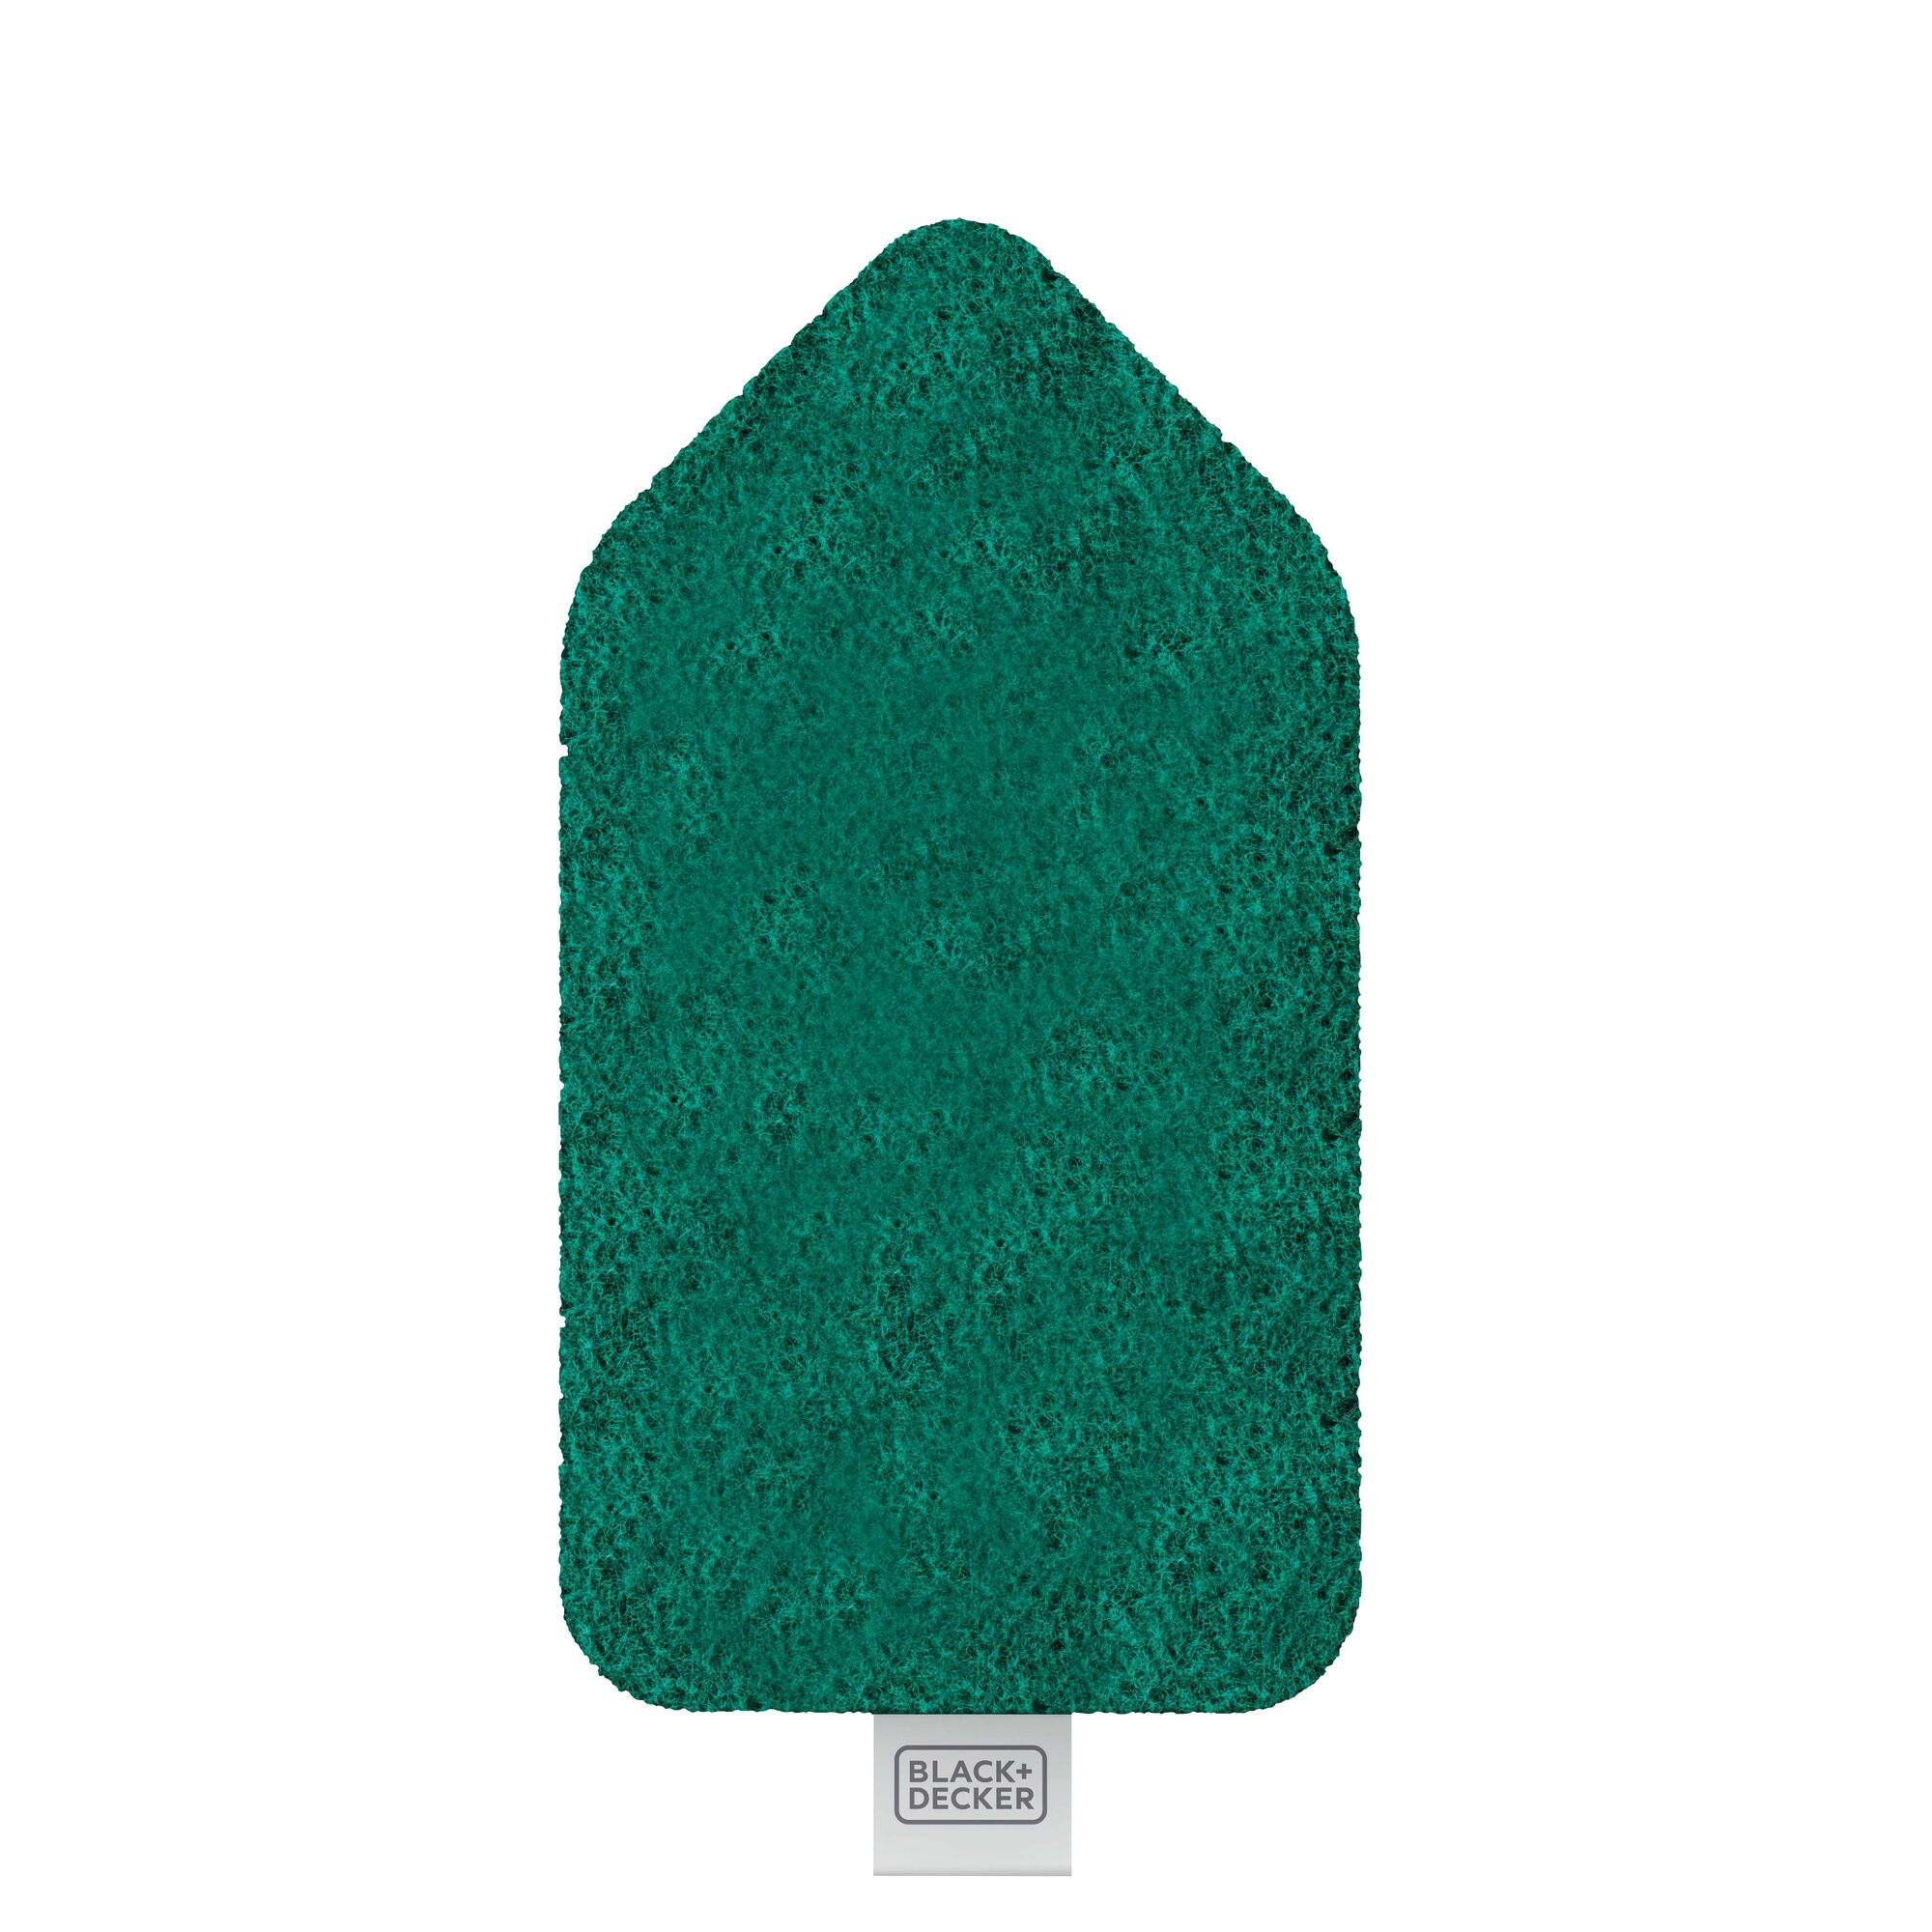 Profile of scumbuster pro scouring replacement pad.